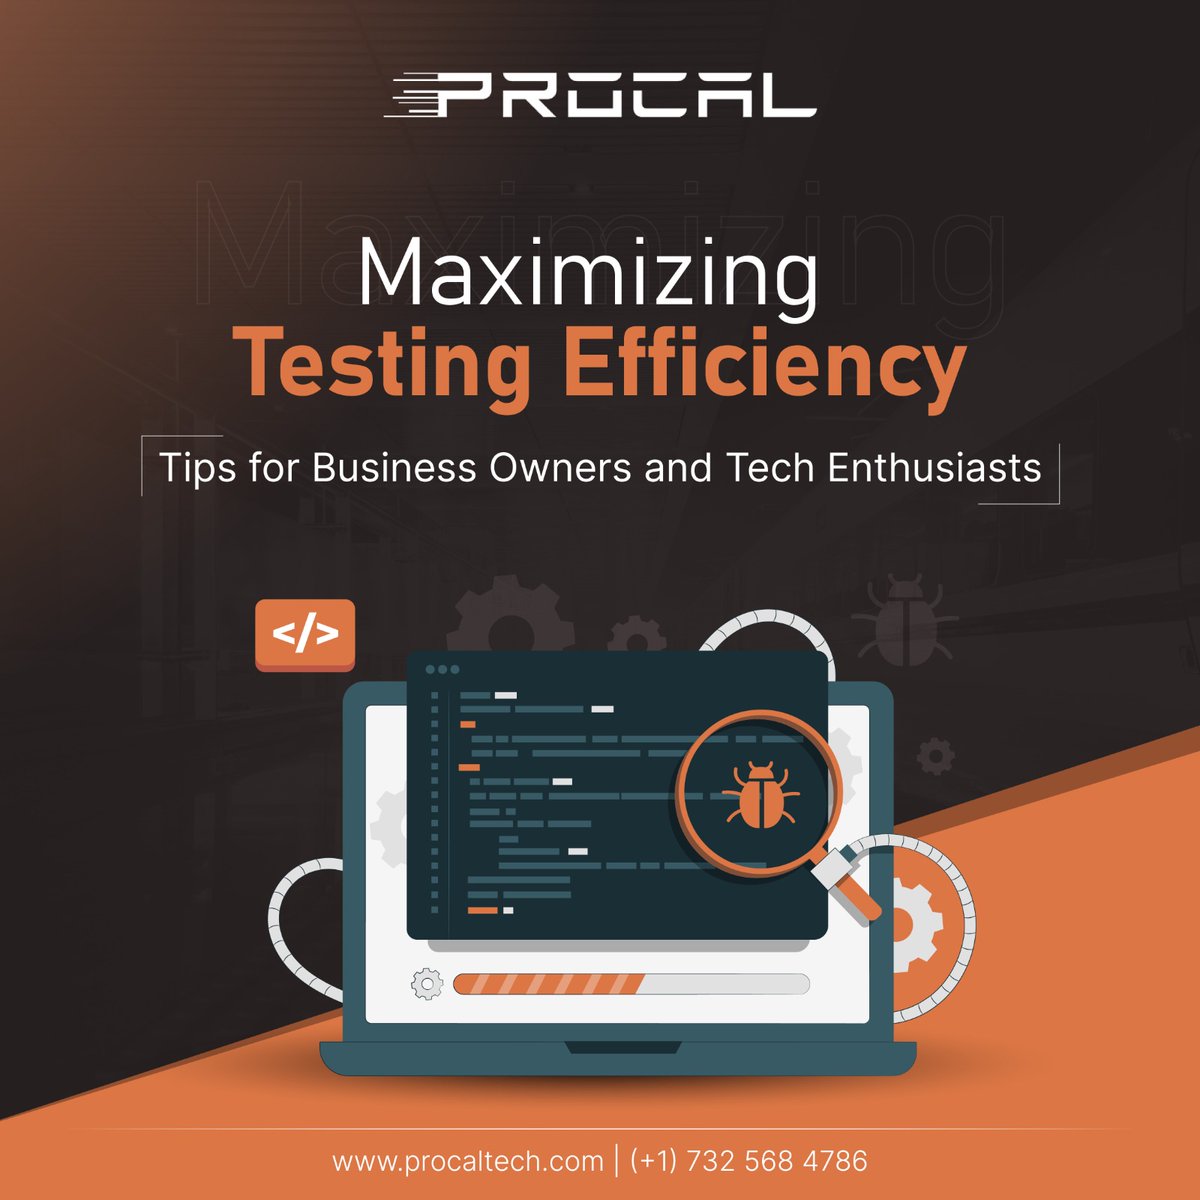 Maximize your mobile app testing efficiency with these expert tips & tricks! Whether you're a developer or a business owner, optimizing testing is crucial.  Follow us @procal_tech #MobileTesting #AppDevelopment #CloudTesting #TechTips #AgileTesting #QualityAssurance